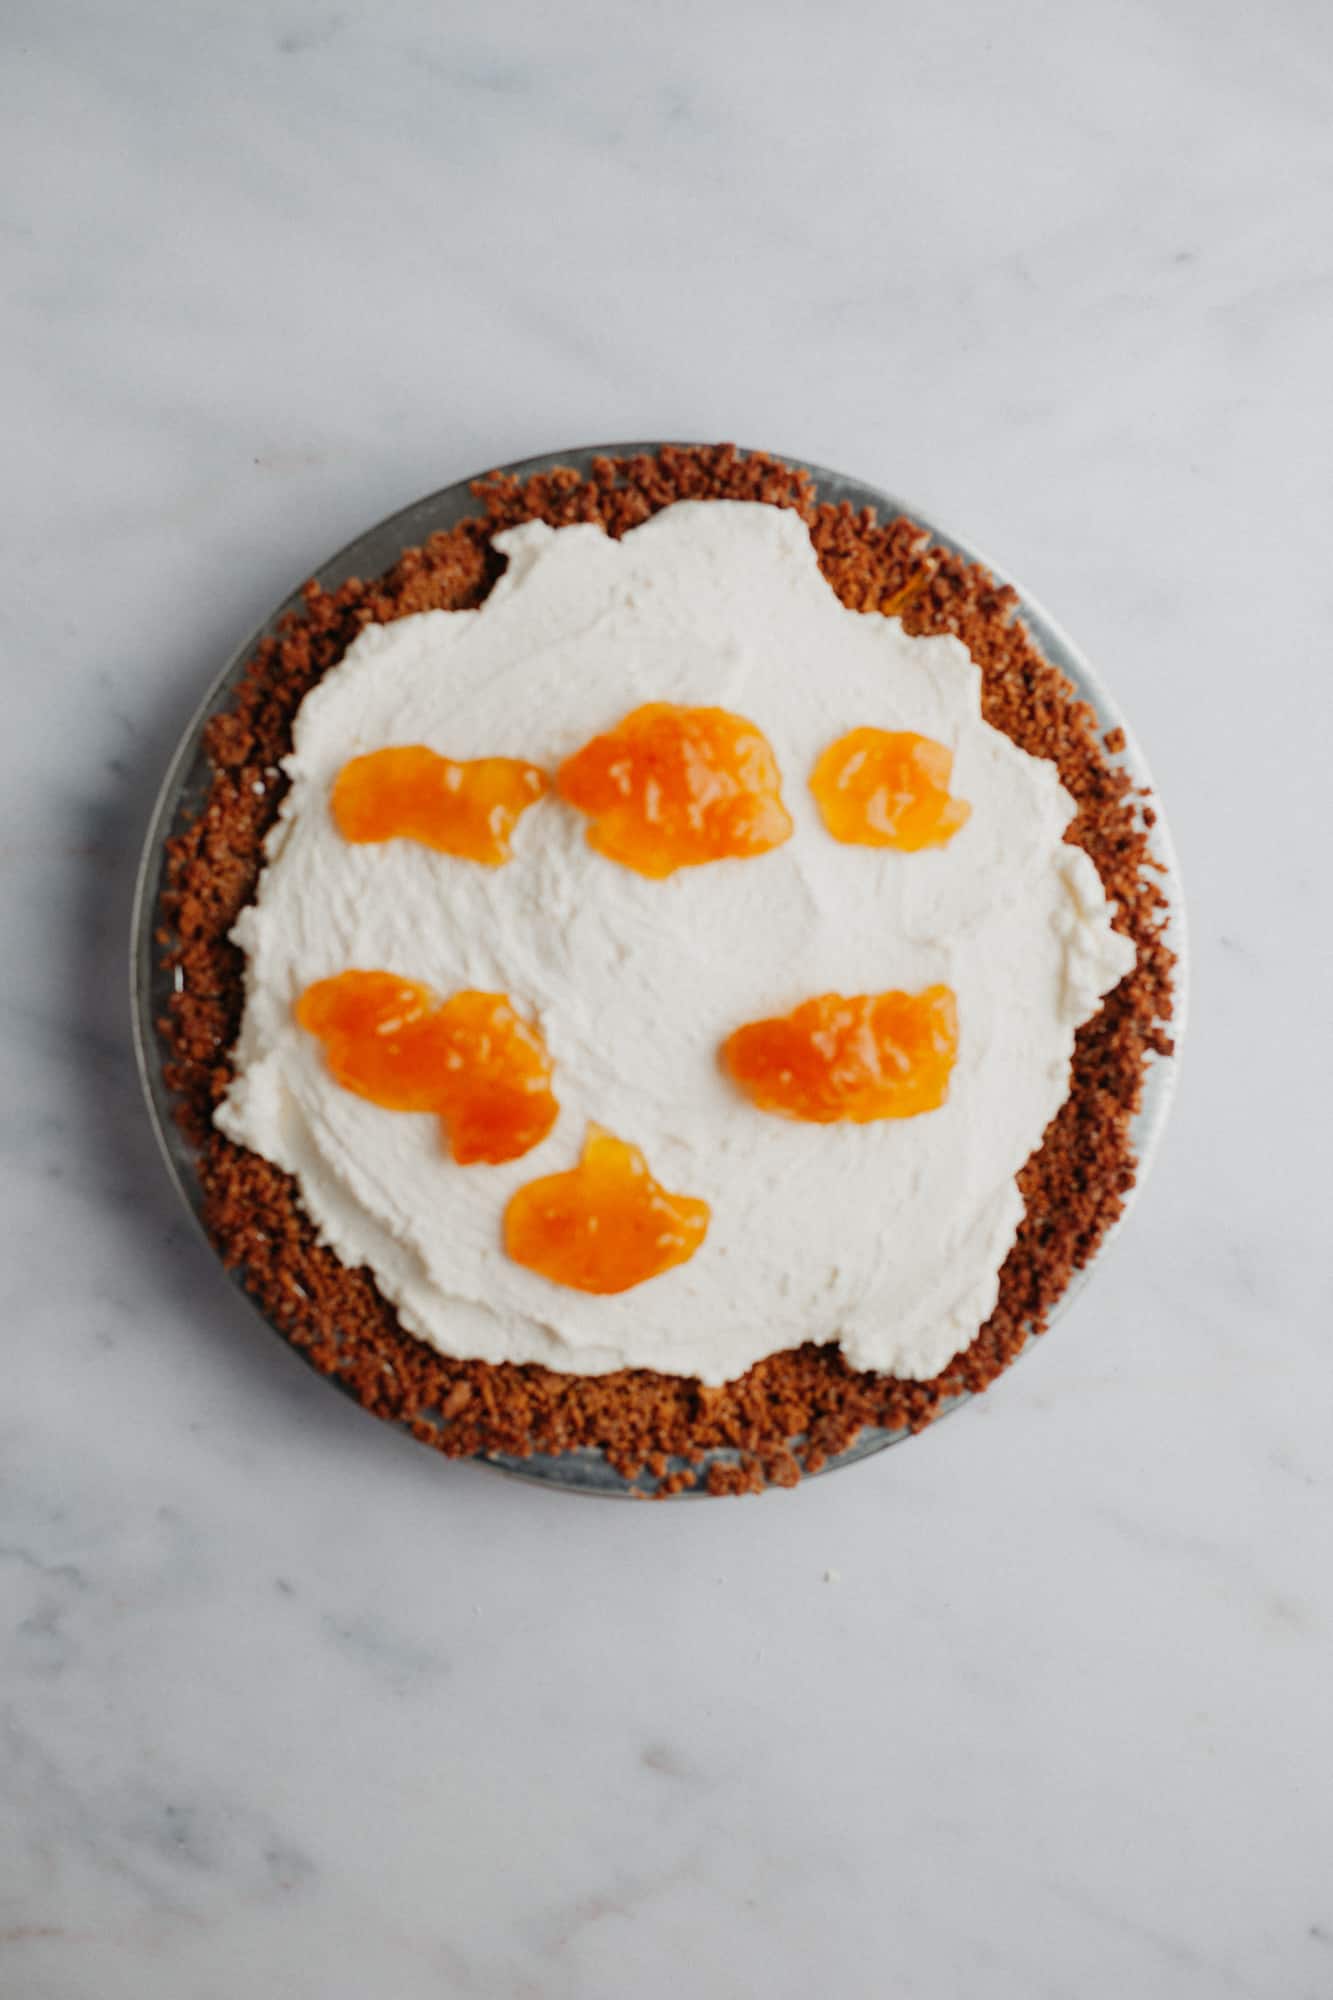 A graham cracker crust with a mascarpone cream filling. There are six dollops of peach jam on top